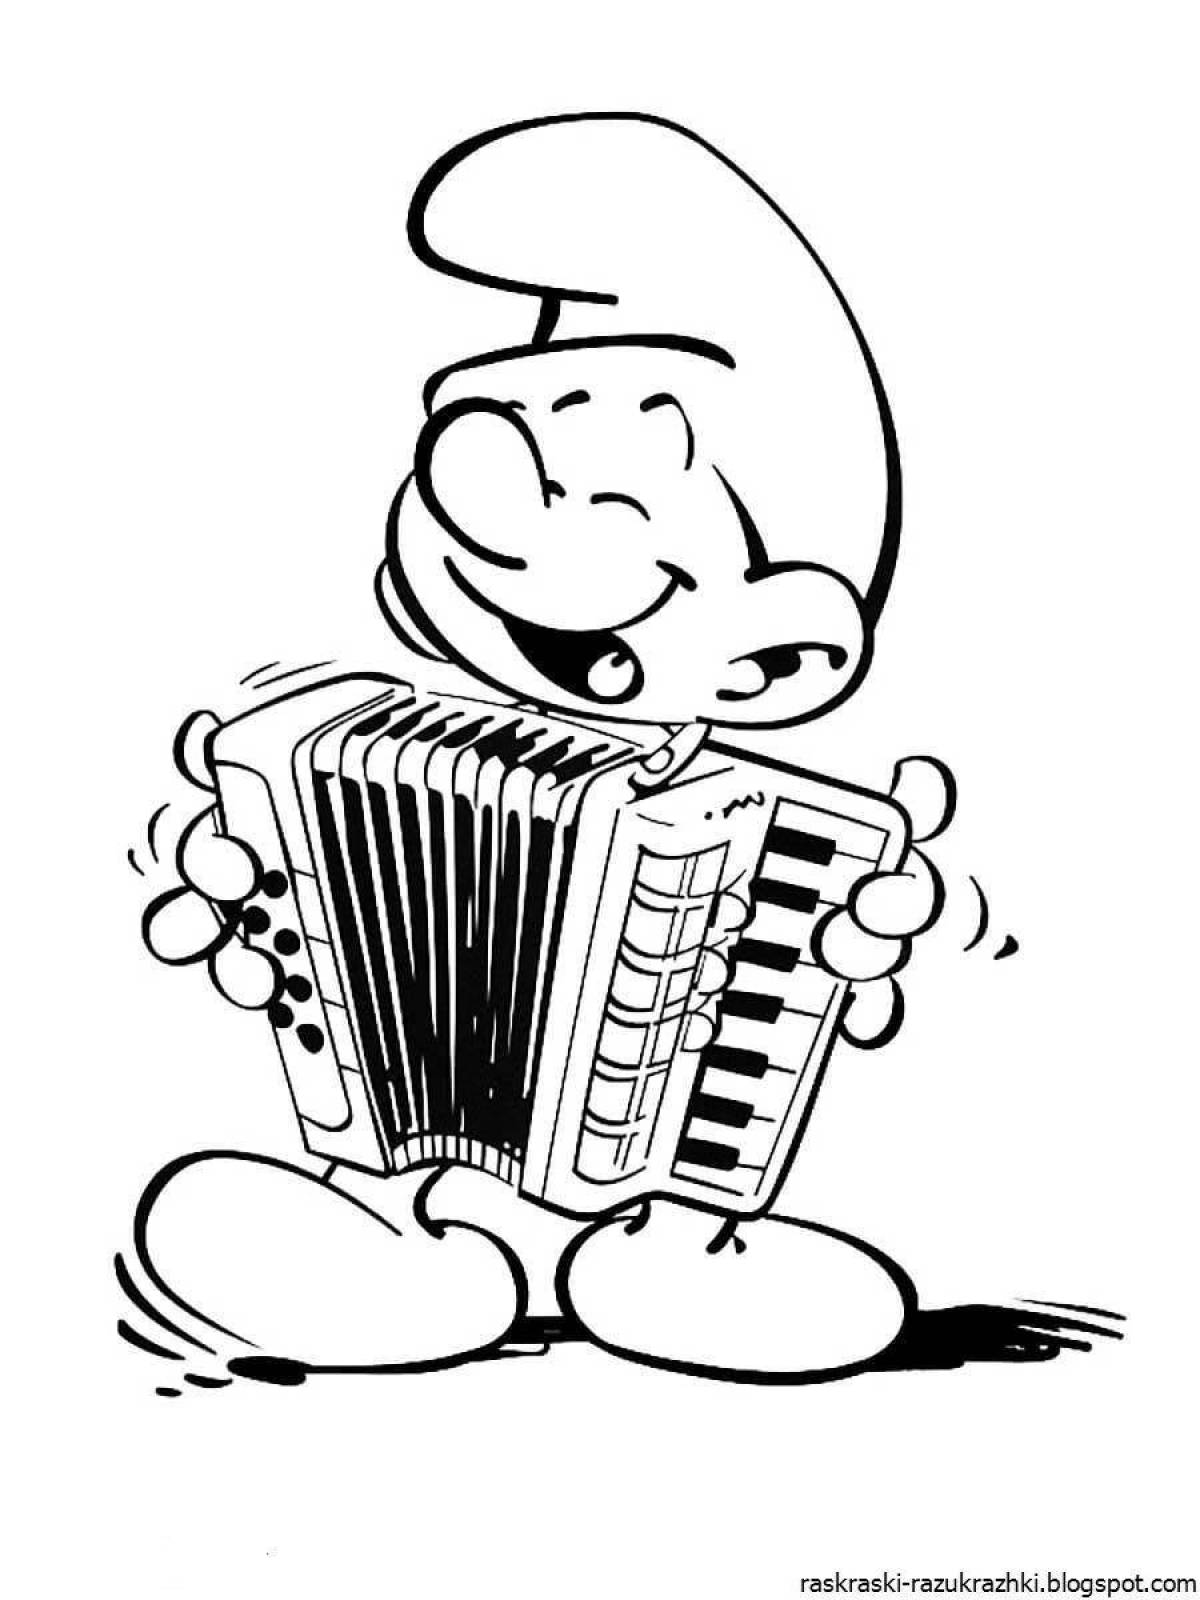 Cute accordion coloring book for kids